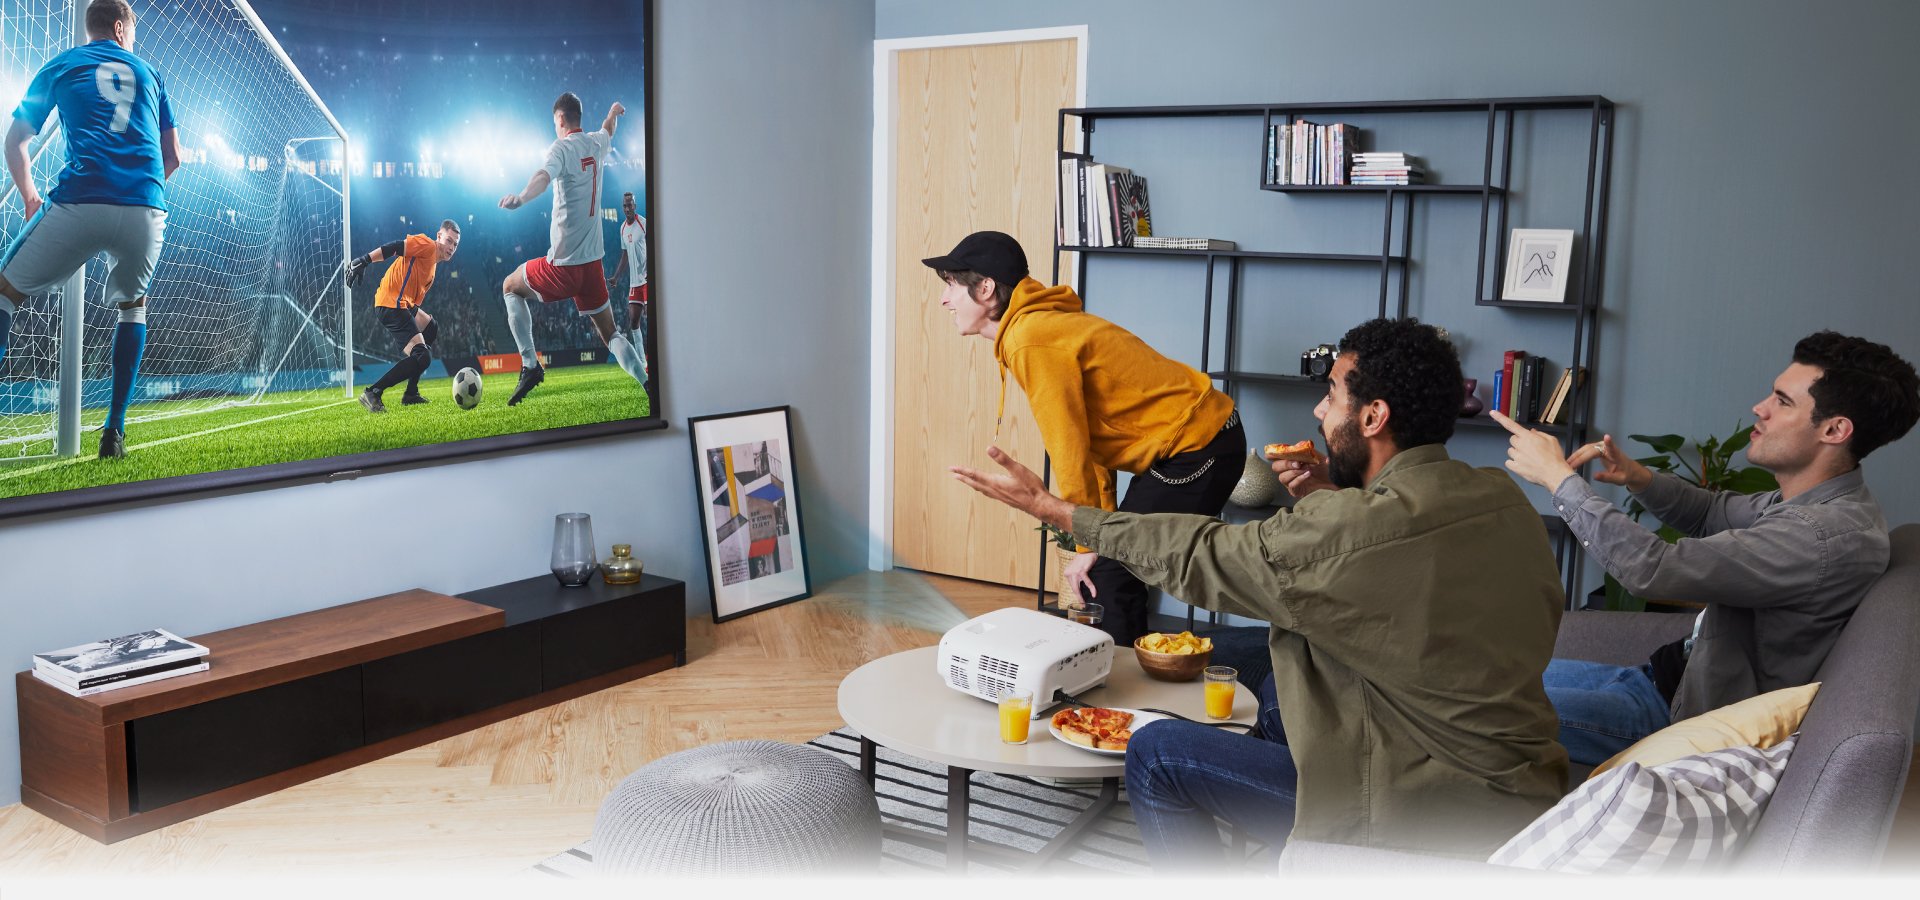 BenQ's 4k sports projector provides you a high-quality experience of sports viewing.